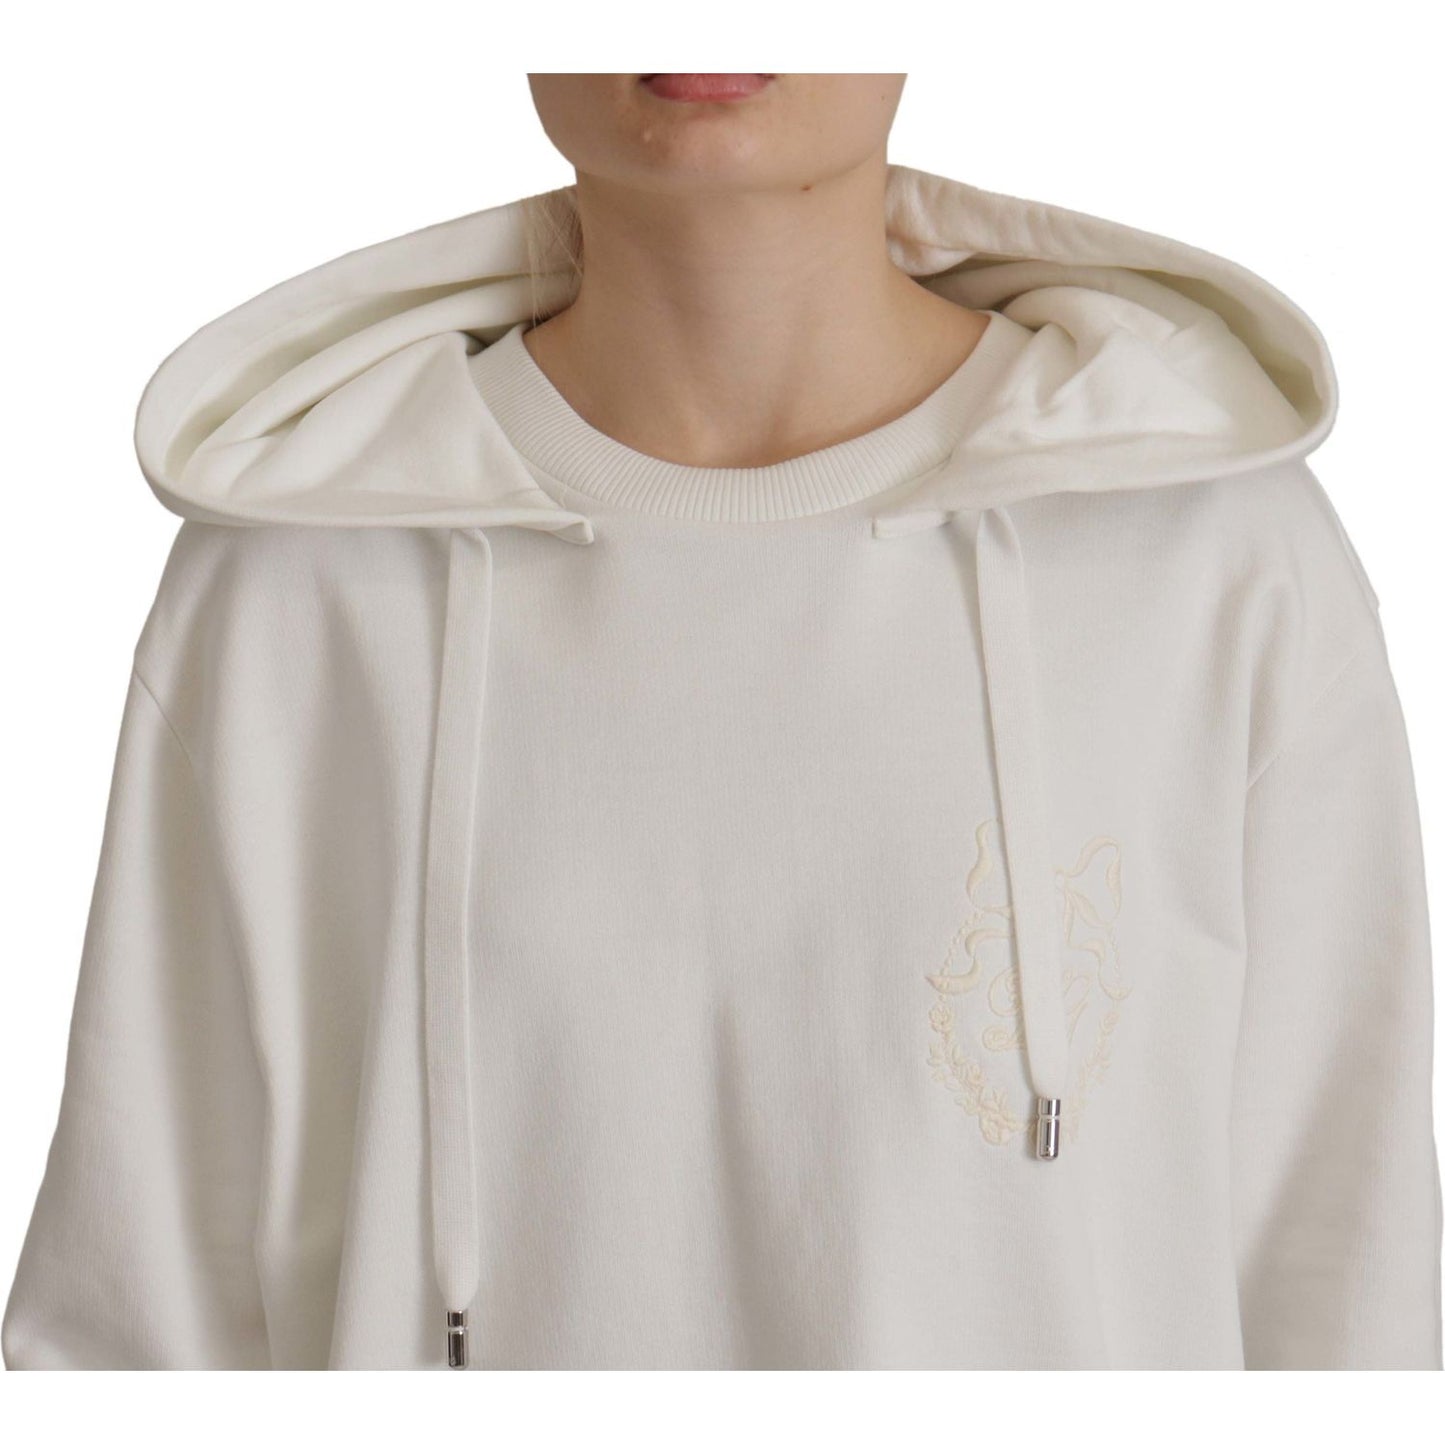 Dolce & Gabbana Chic White Hooded Pullover Sweater white-hoodie-pullover-embroidered-sweater